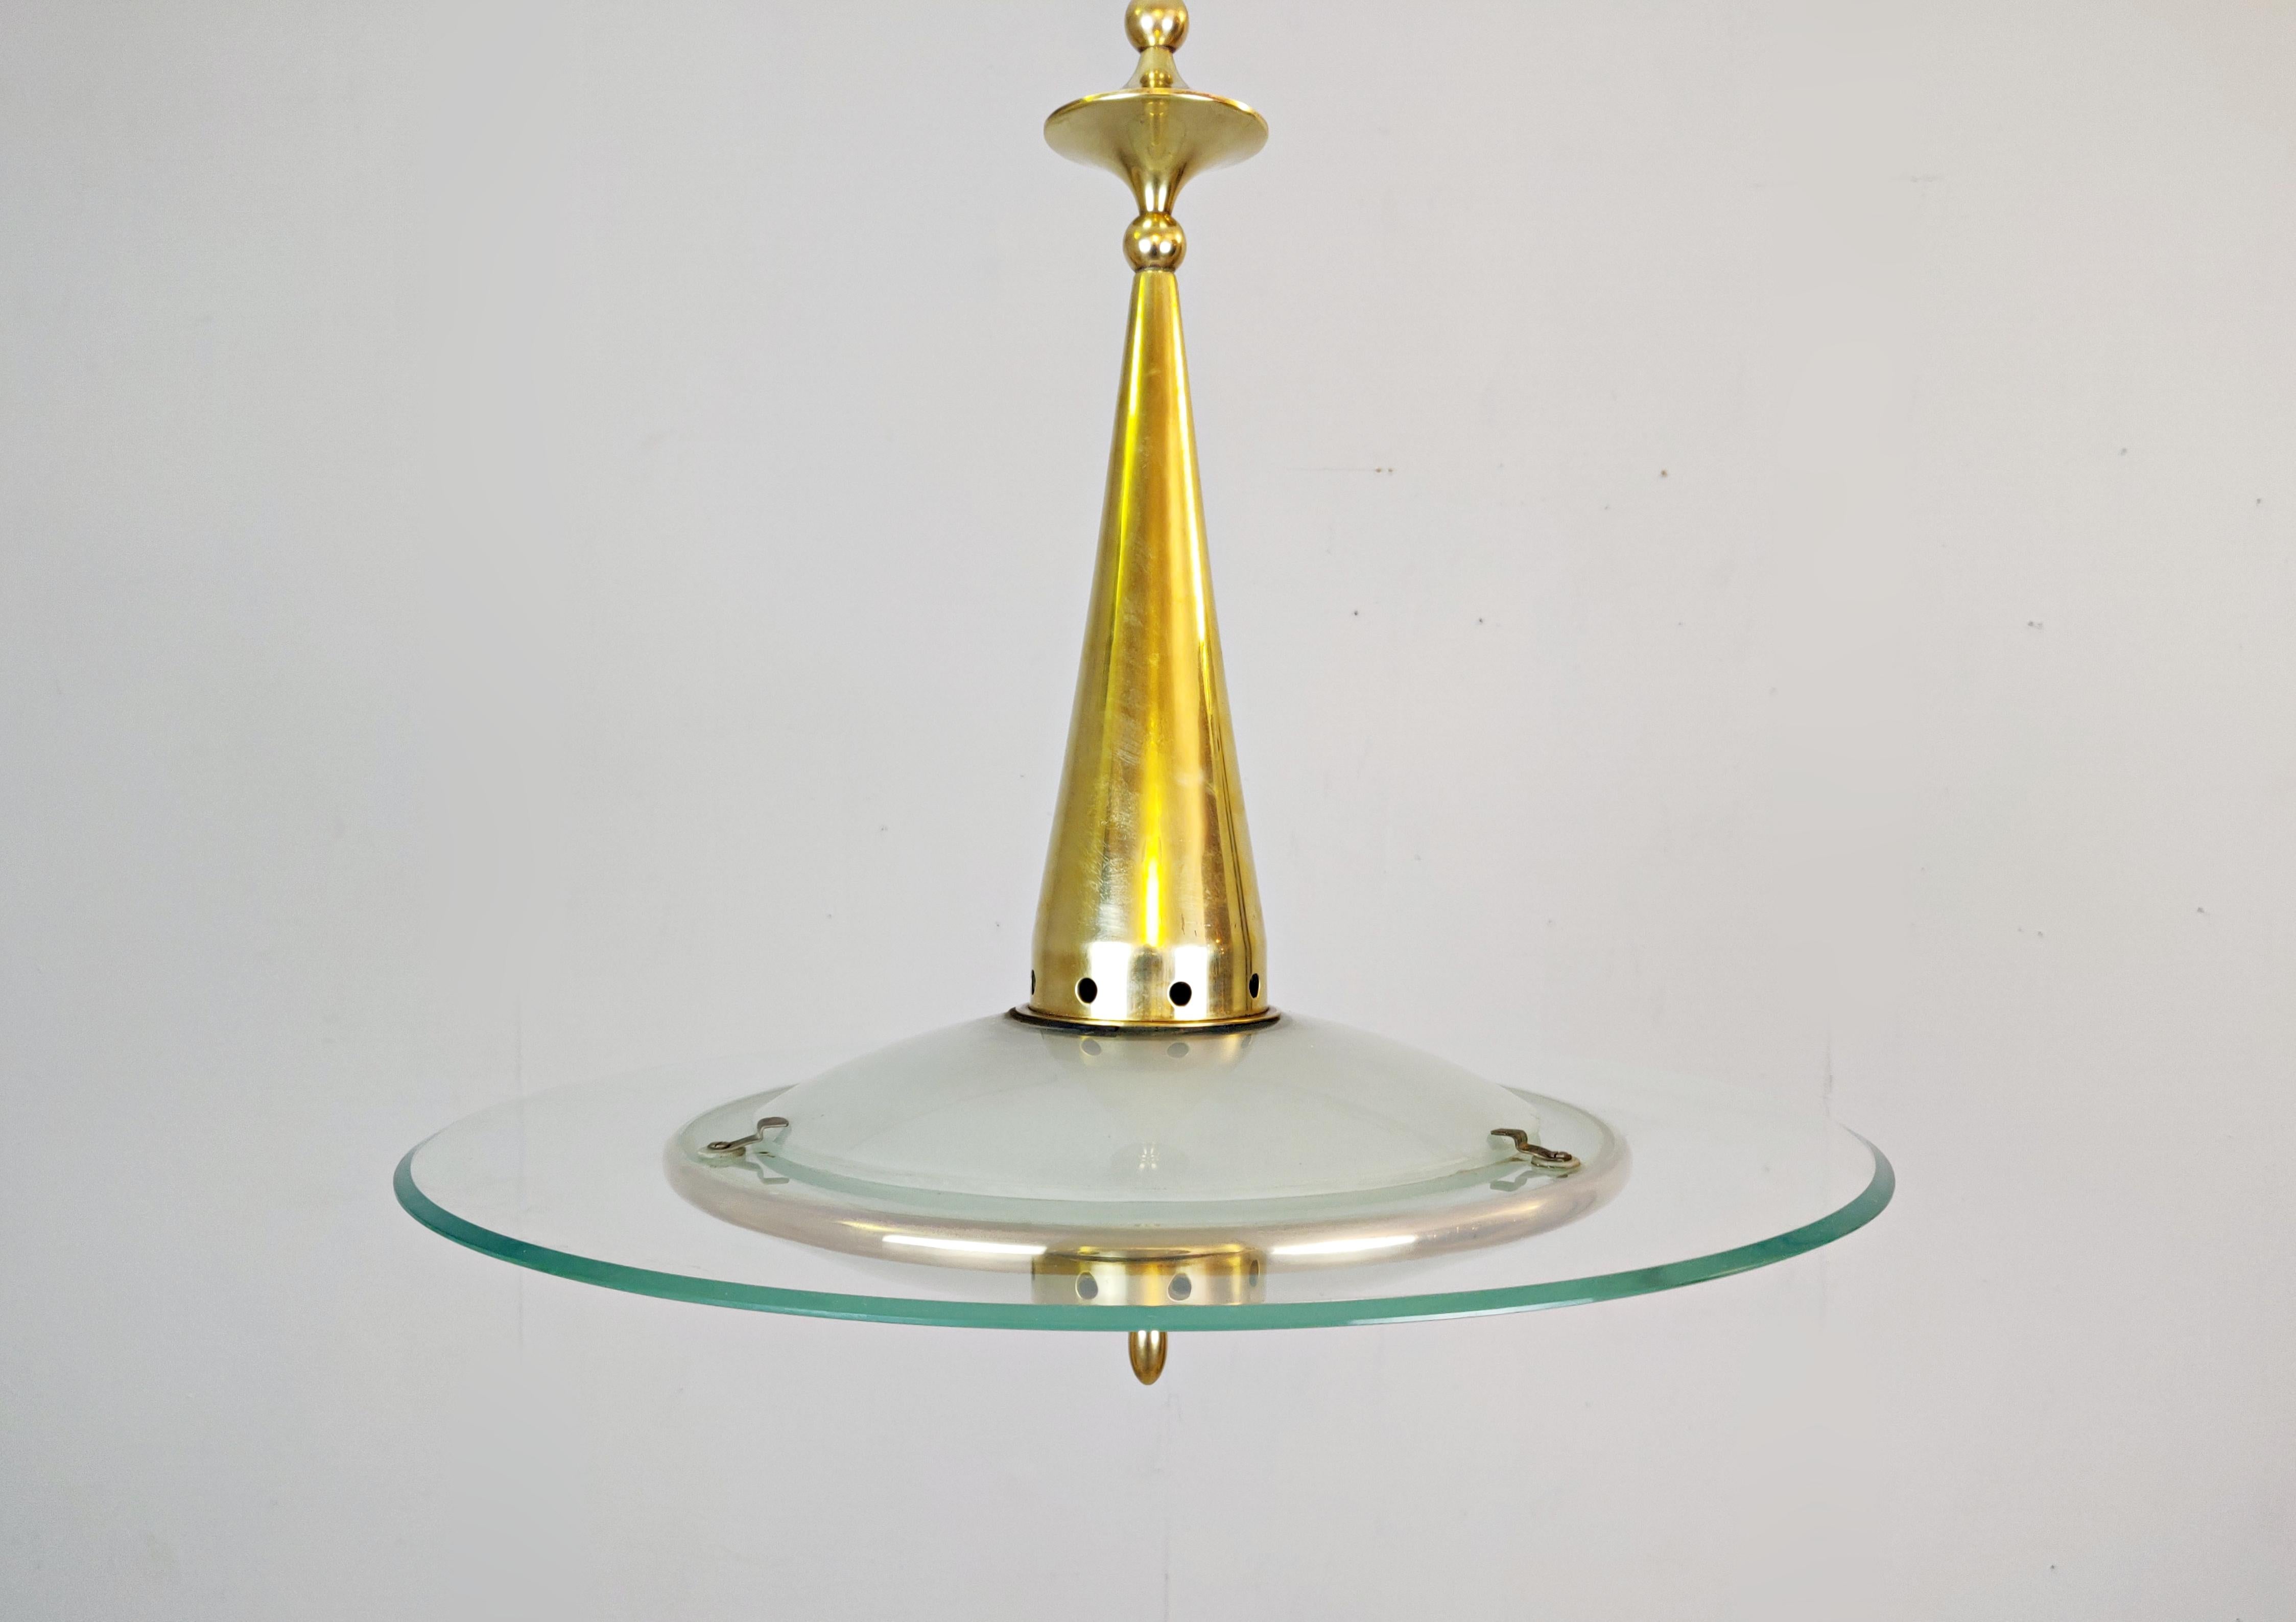 Midcentury pendant light in glass and brass.